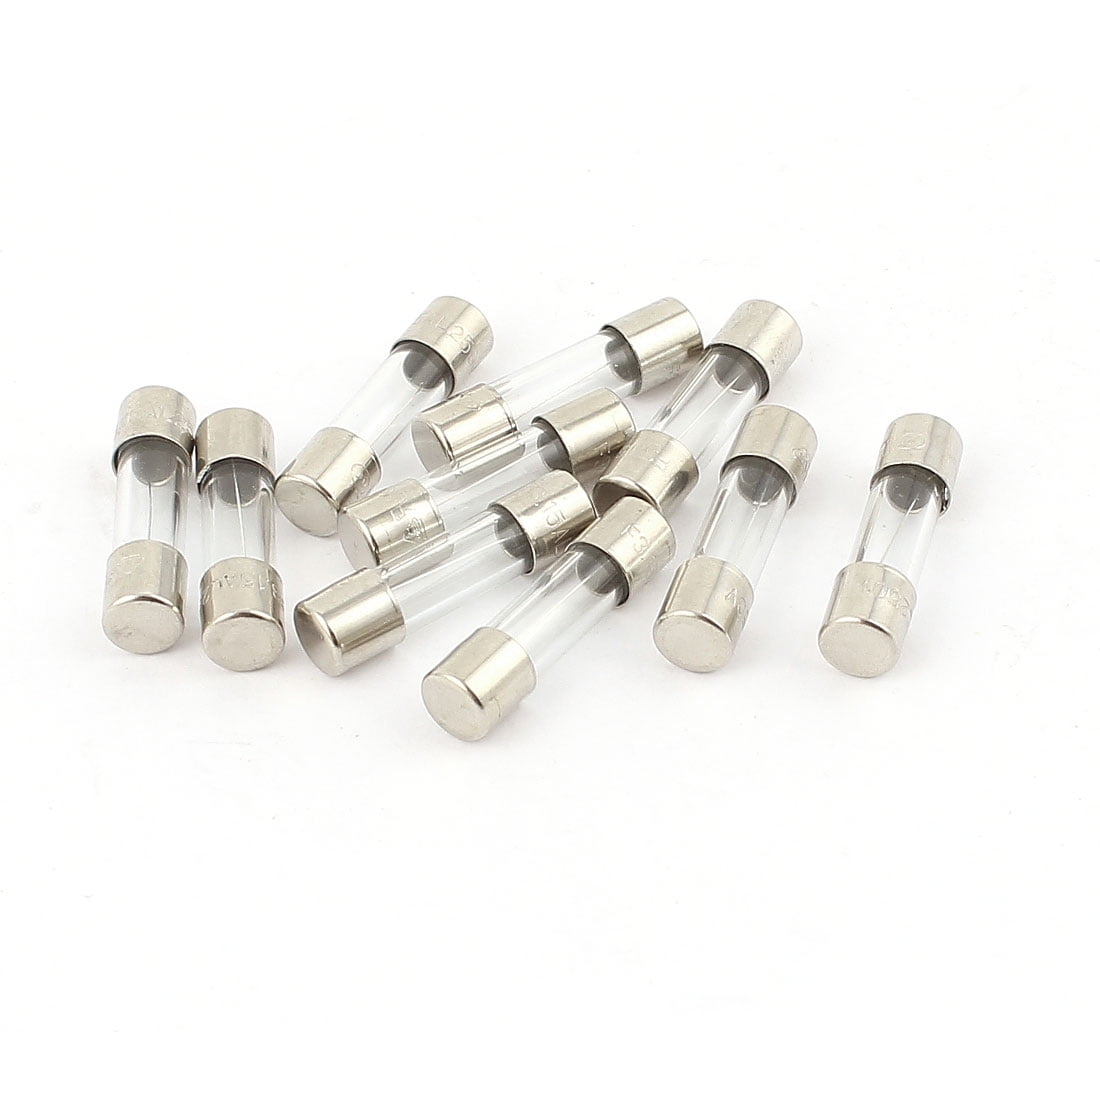 TEN NEW 20MM GLASS 3.15A FAST BLOW FUSE 